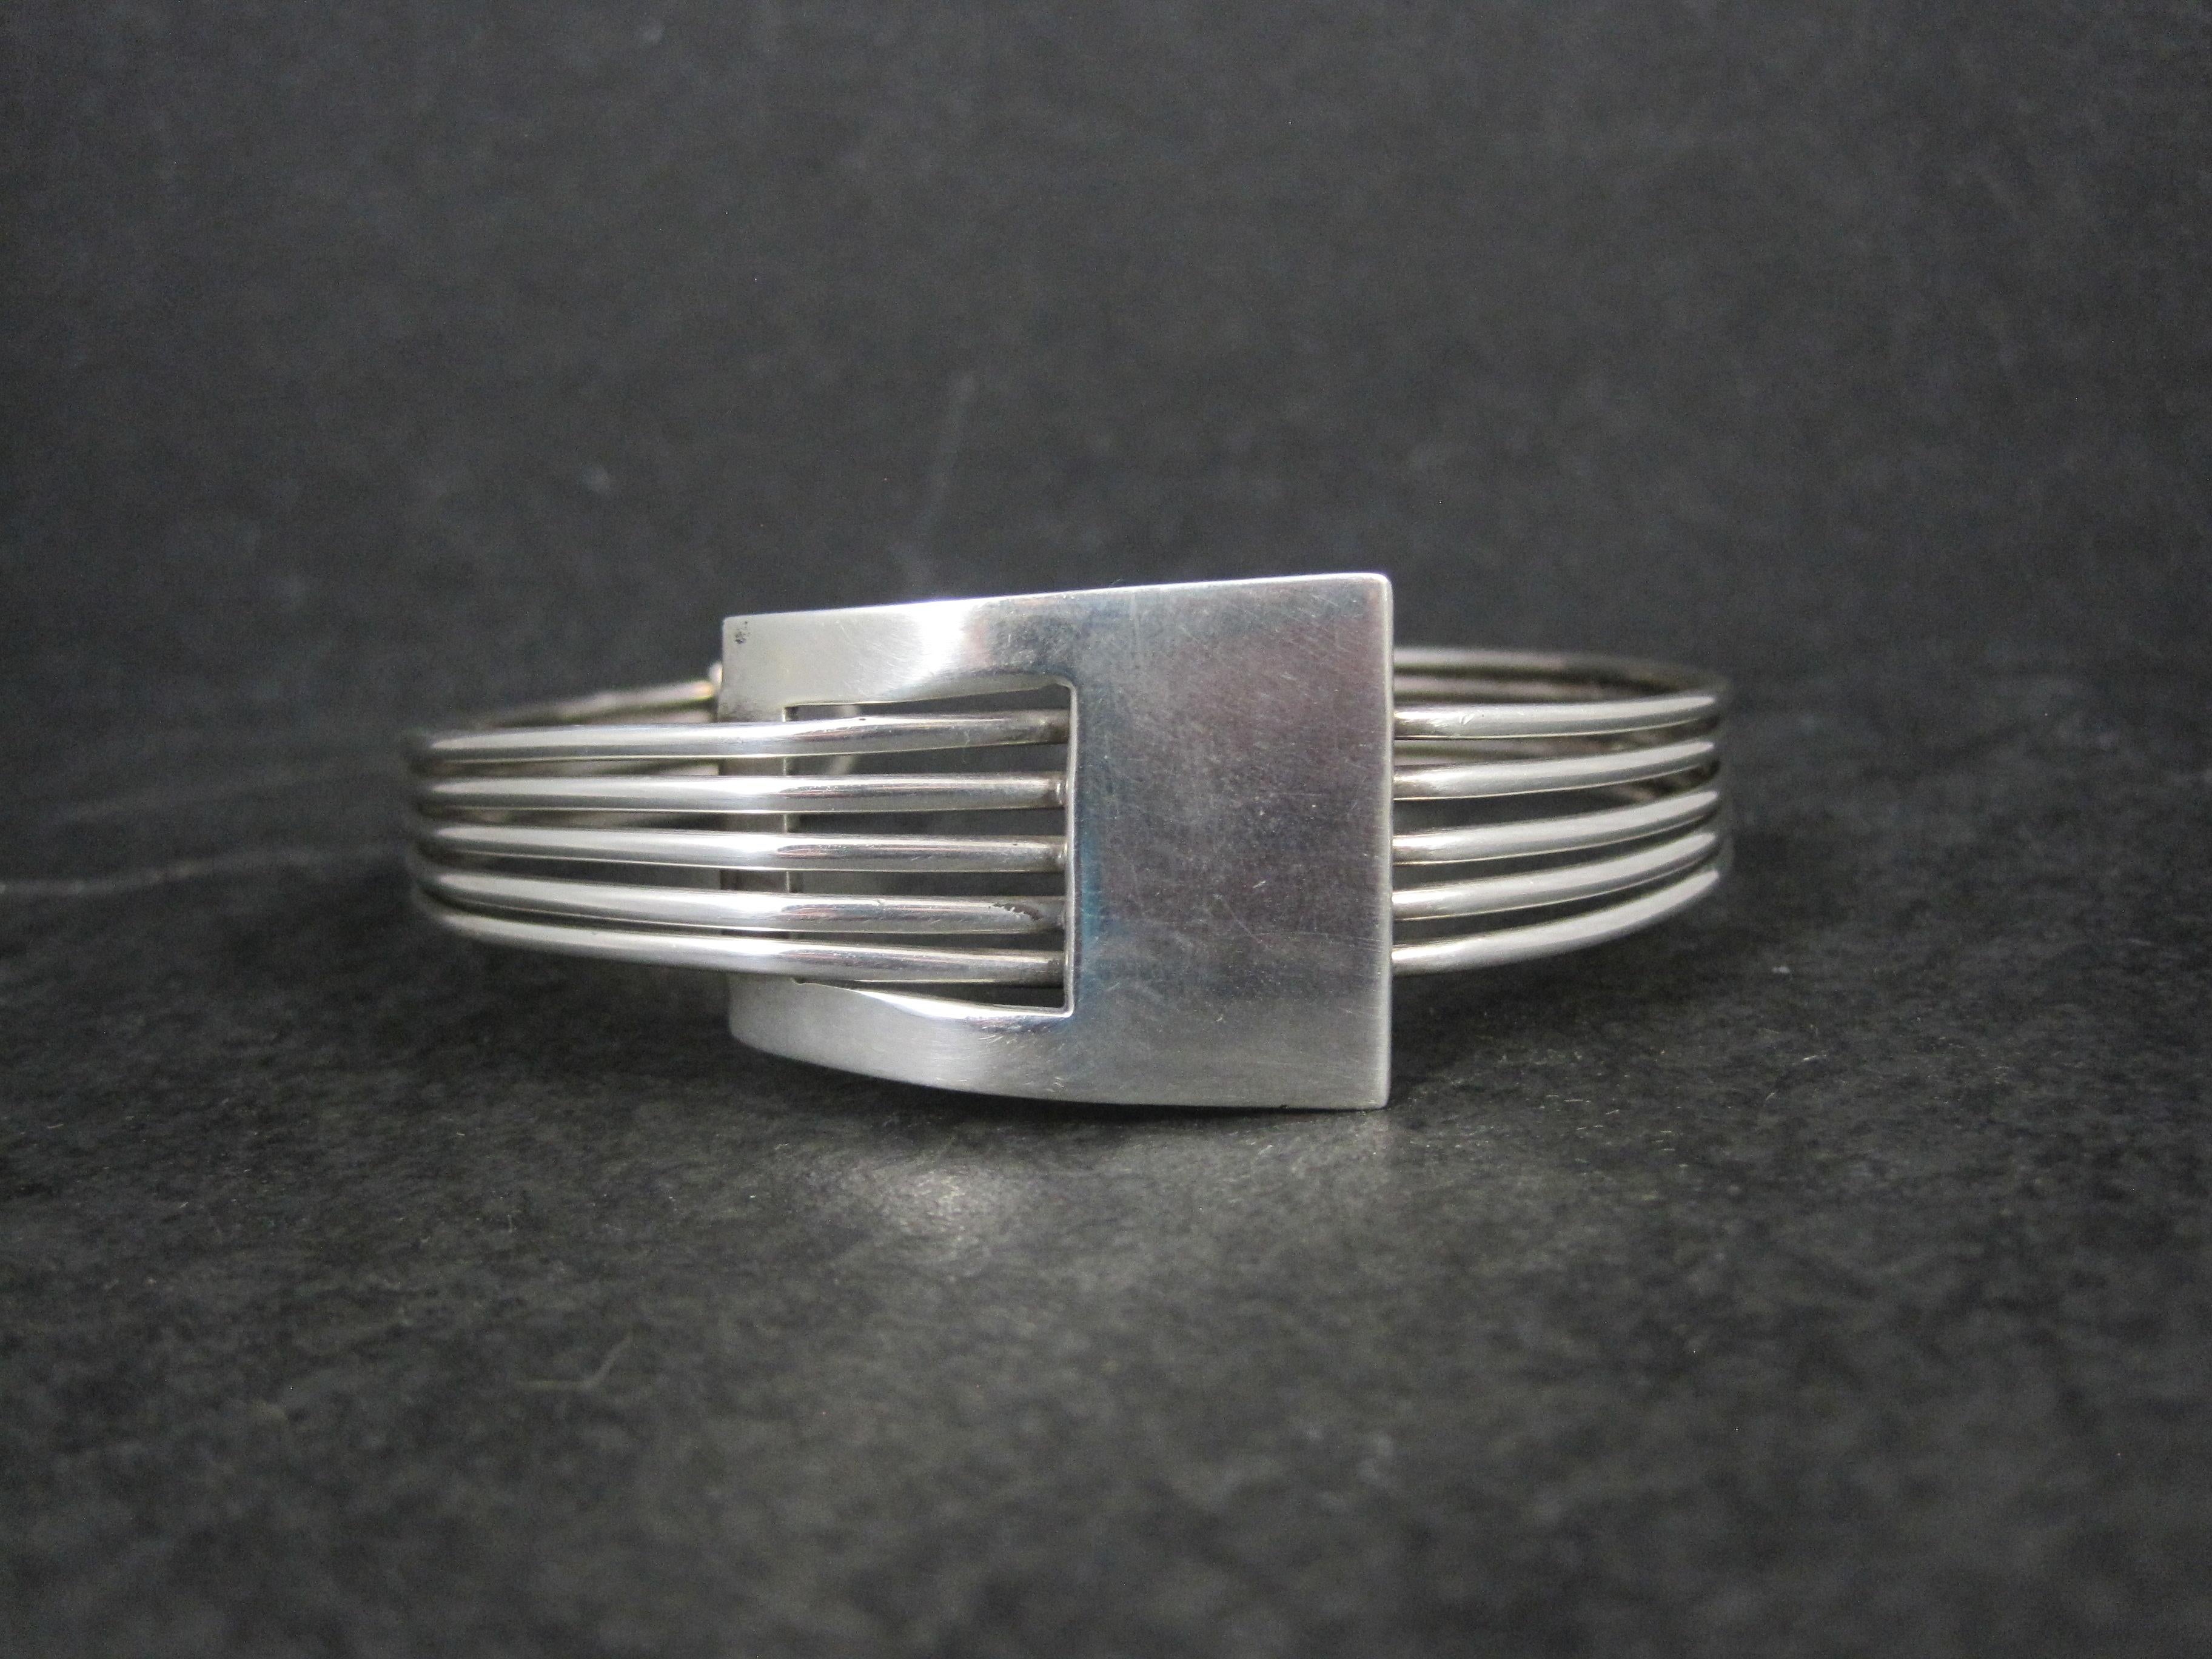 This gorgeous, mod style cuff bracelet is sterling silver.

The face of this cuff measures 7/8 of an inch at its widest point and tapers down to 3/8 of an inch.
It has an inner circumference of 7 inches, including the 1 inch gap.
Weight: 26.8